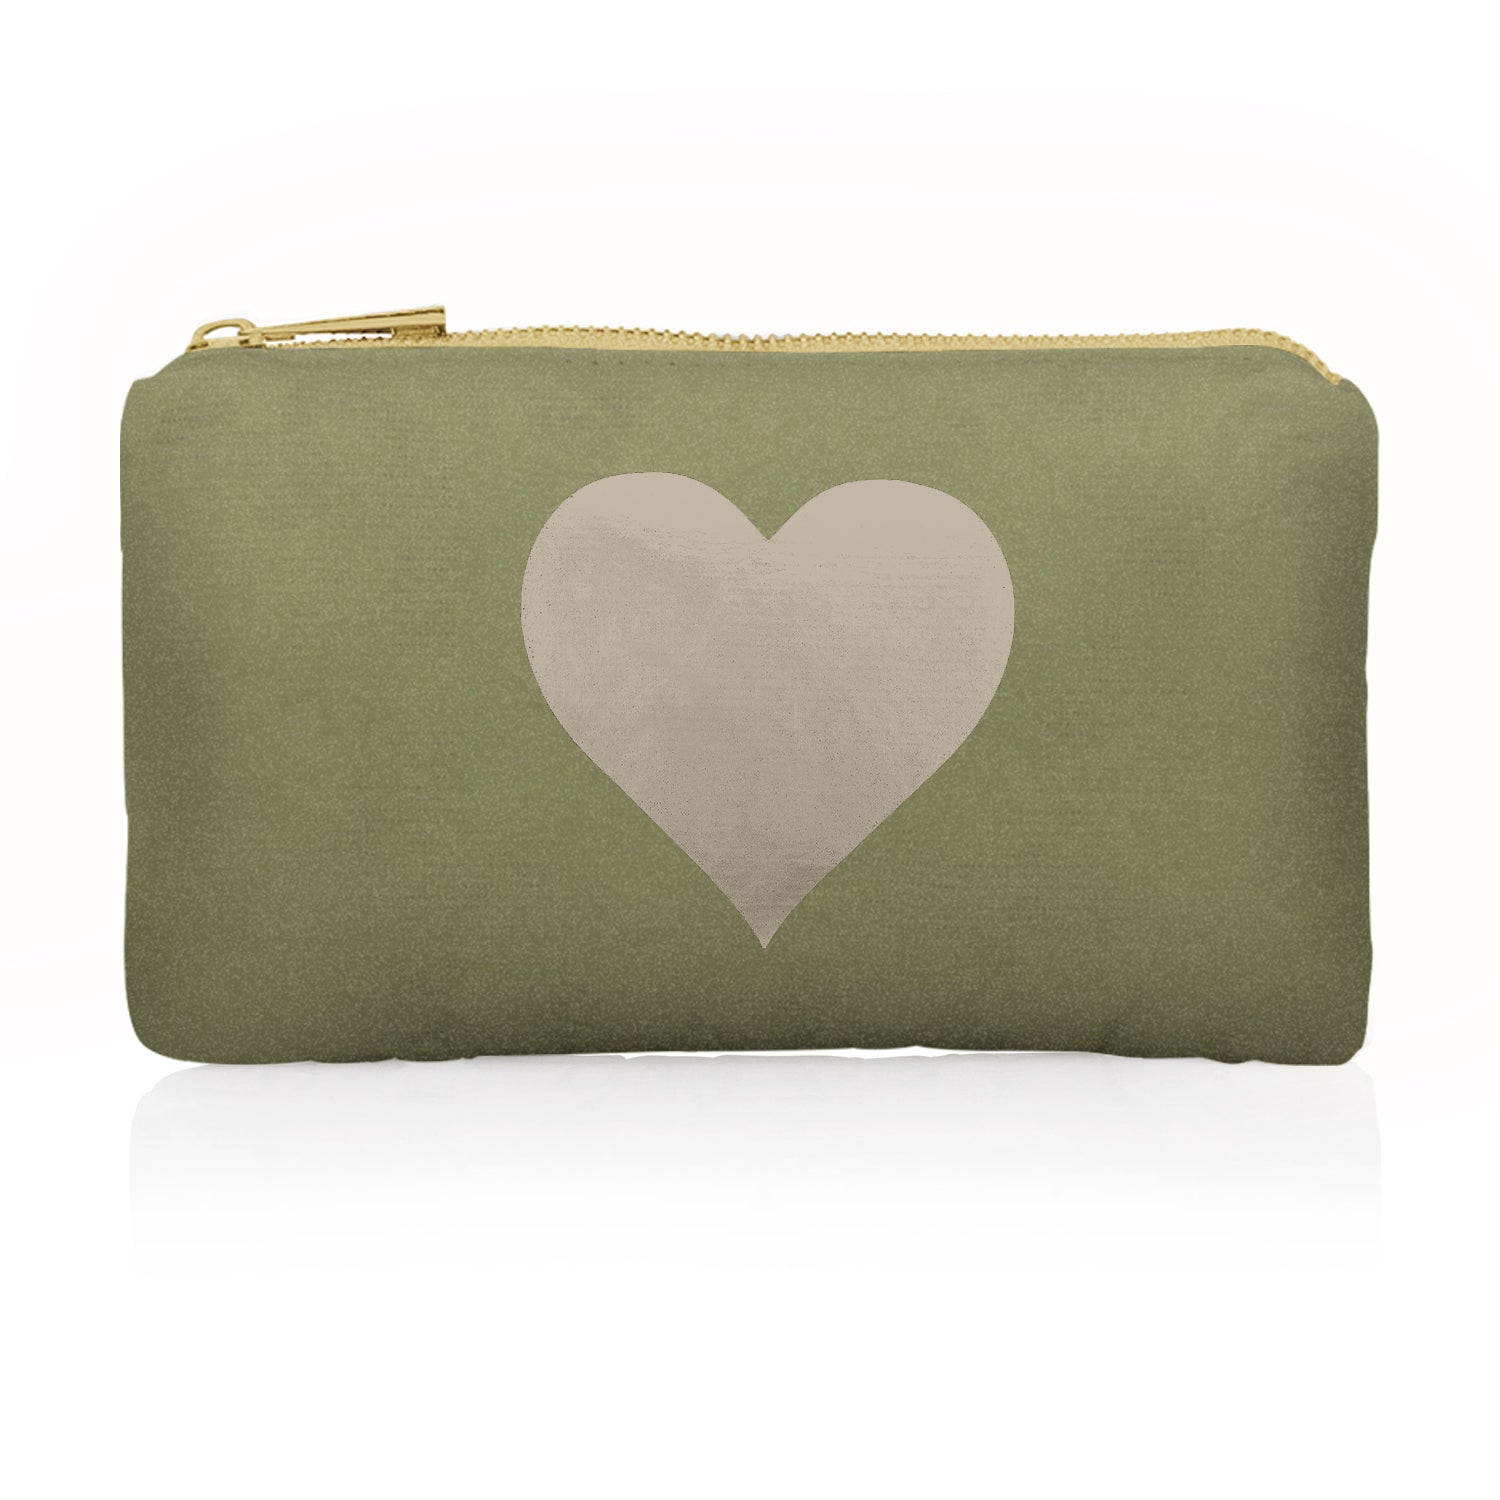 Mini Zipper Pack in Shimmer Army Green with Golden Heart